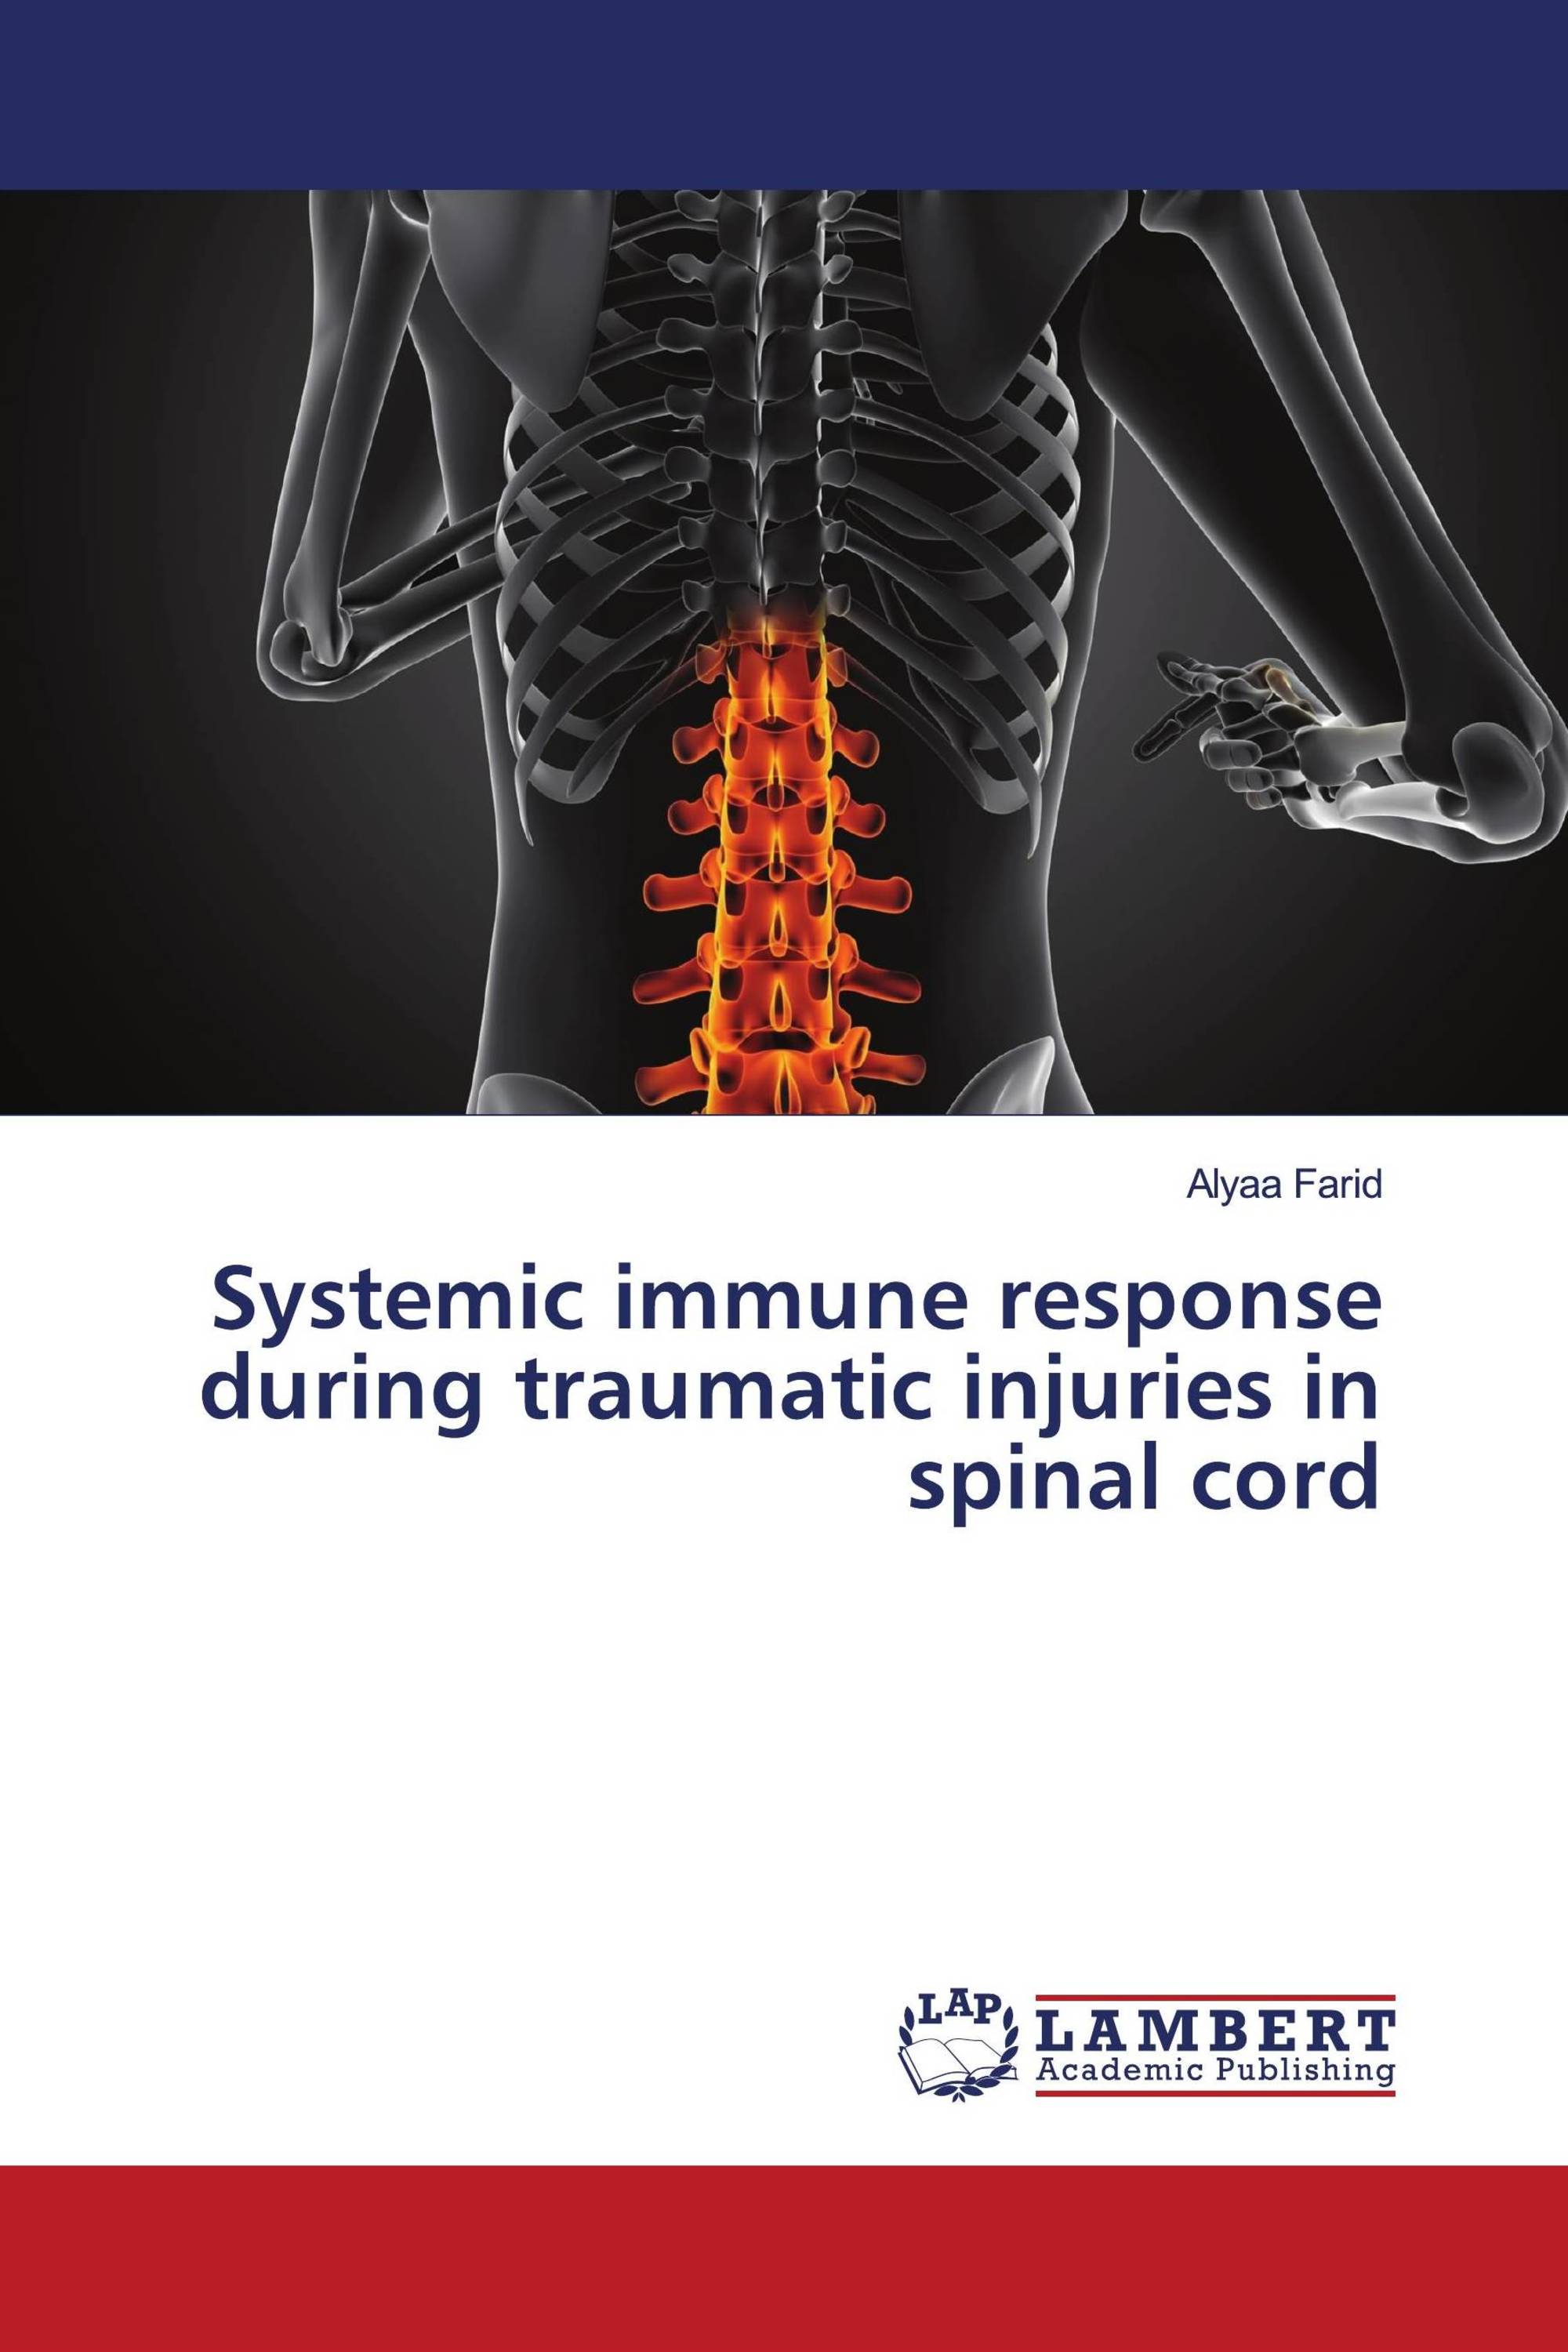 Systemic immune response during traumatic injuries in spinal cord